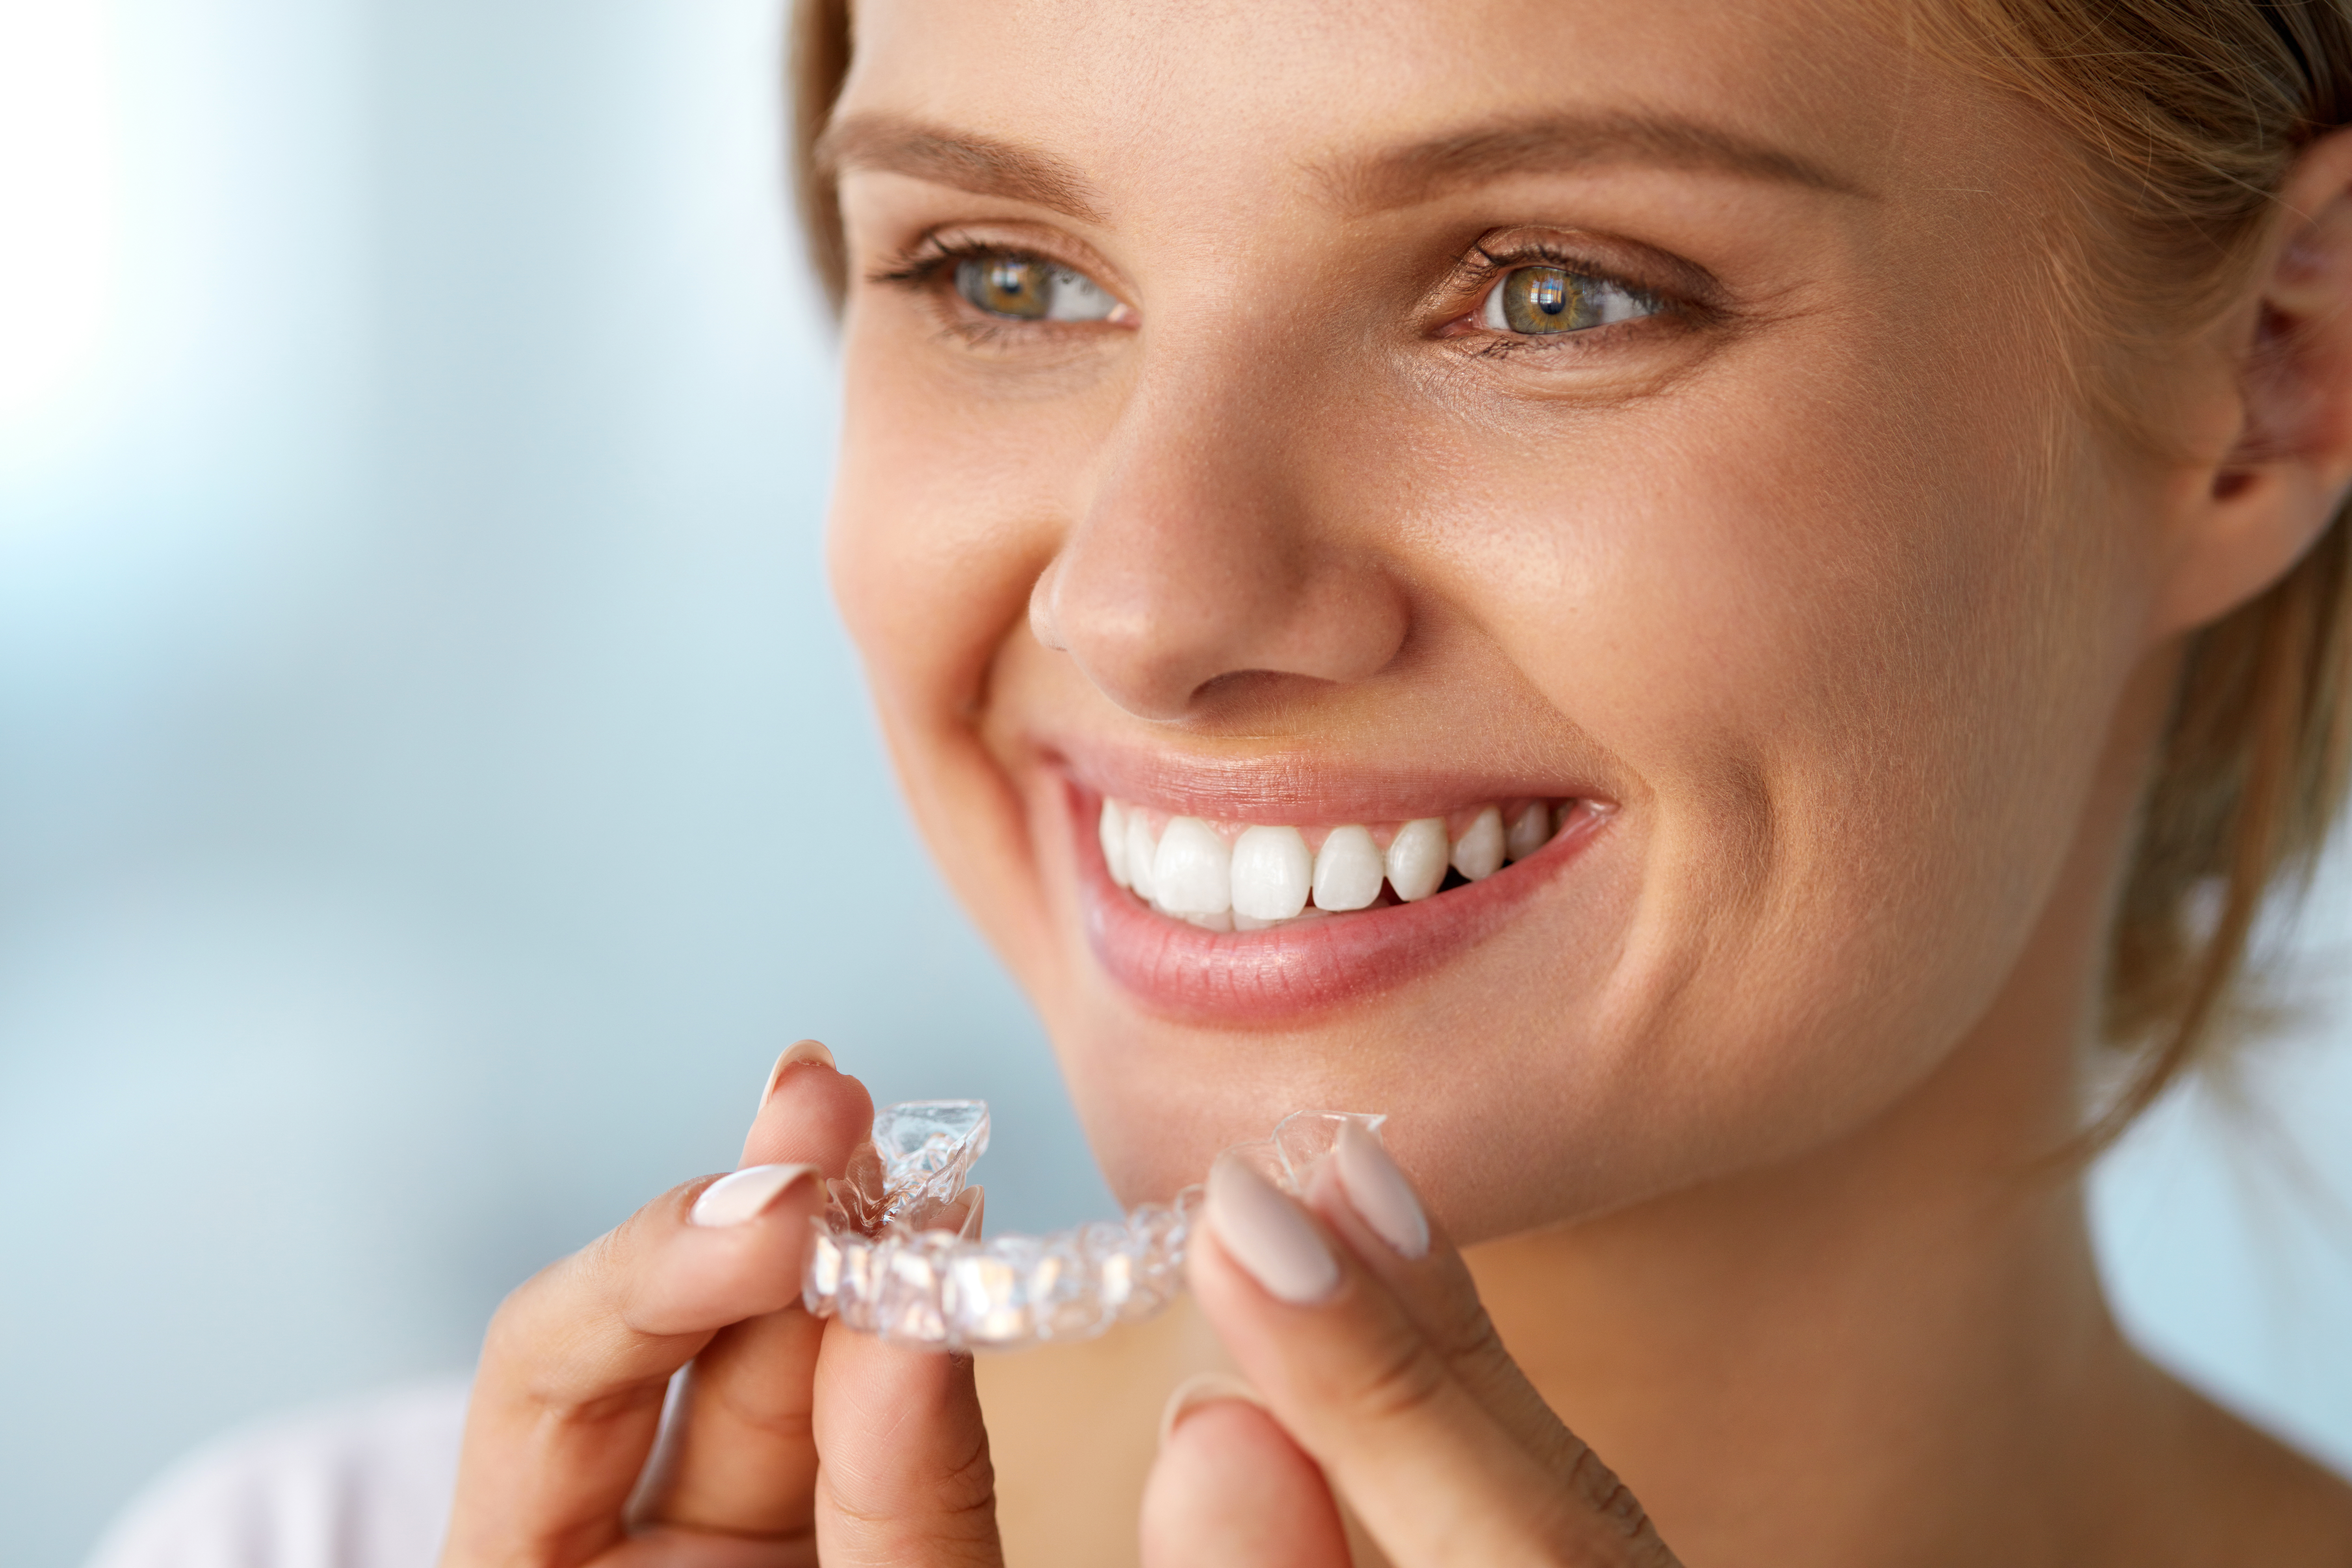 Portrait Of Smiling Woman With Healthy Straight White Teeth Holding Invisalign